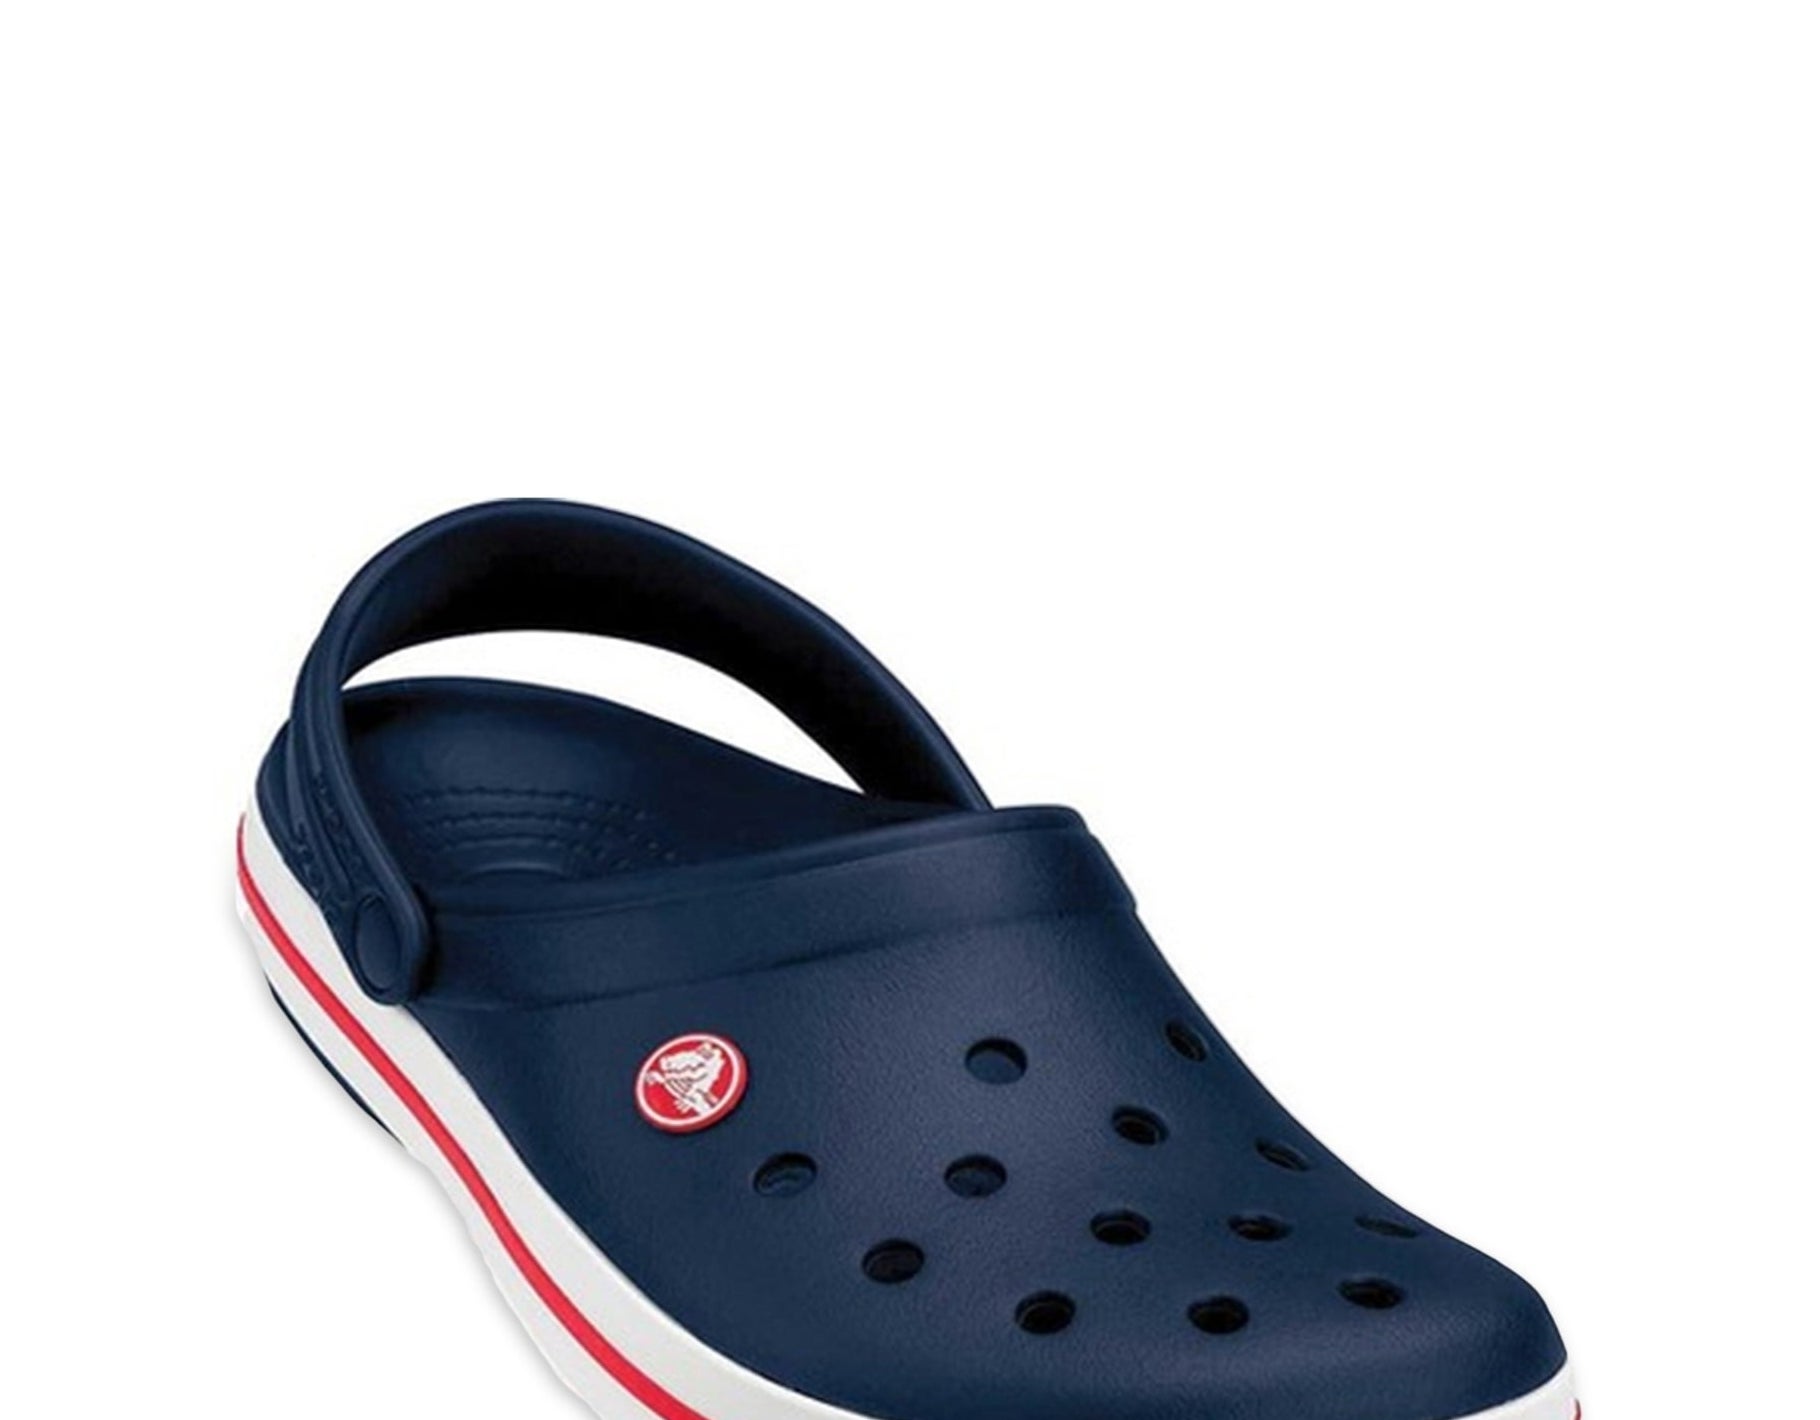 The croc clog sandals in blue with a red stripe.